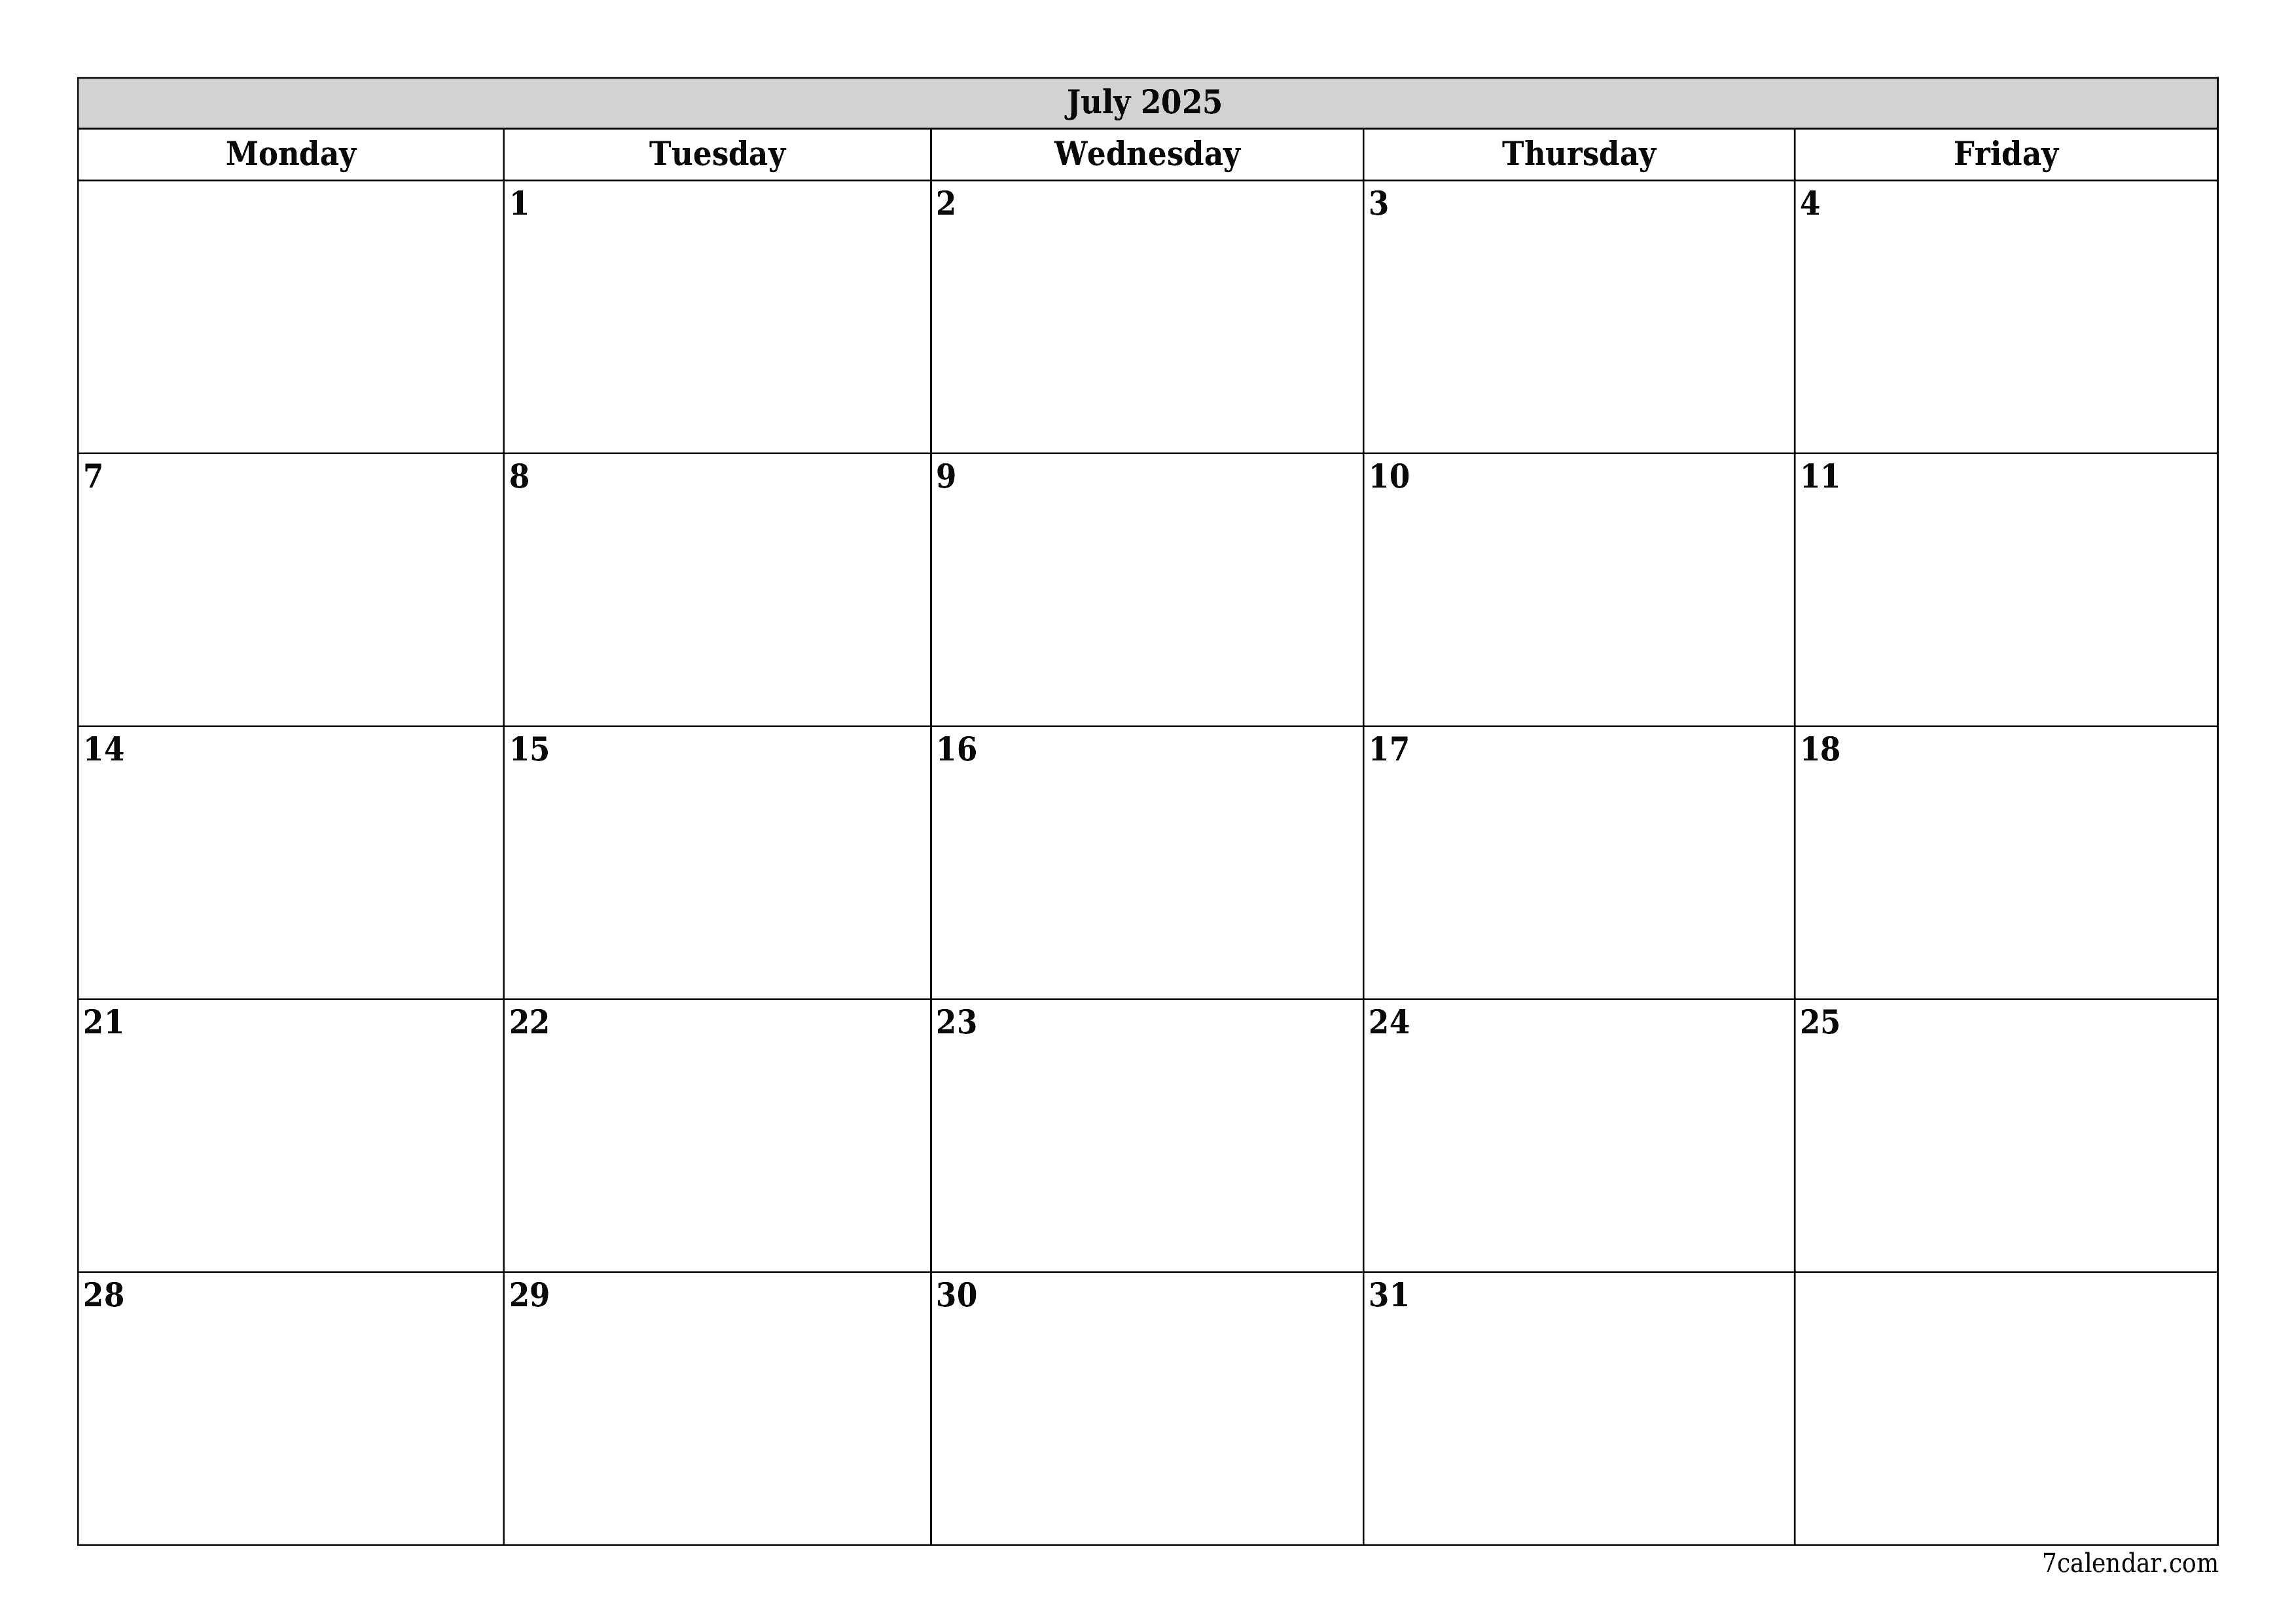 printable wall template free horizontal Monthly planner calendar July (Jul) 2025